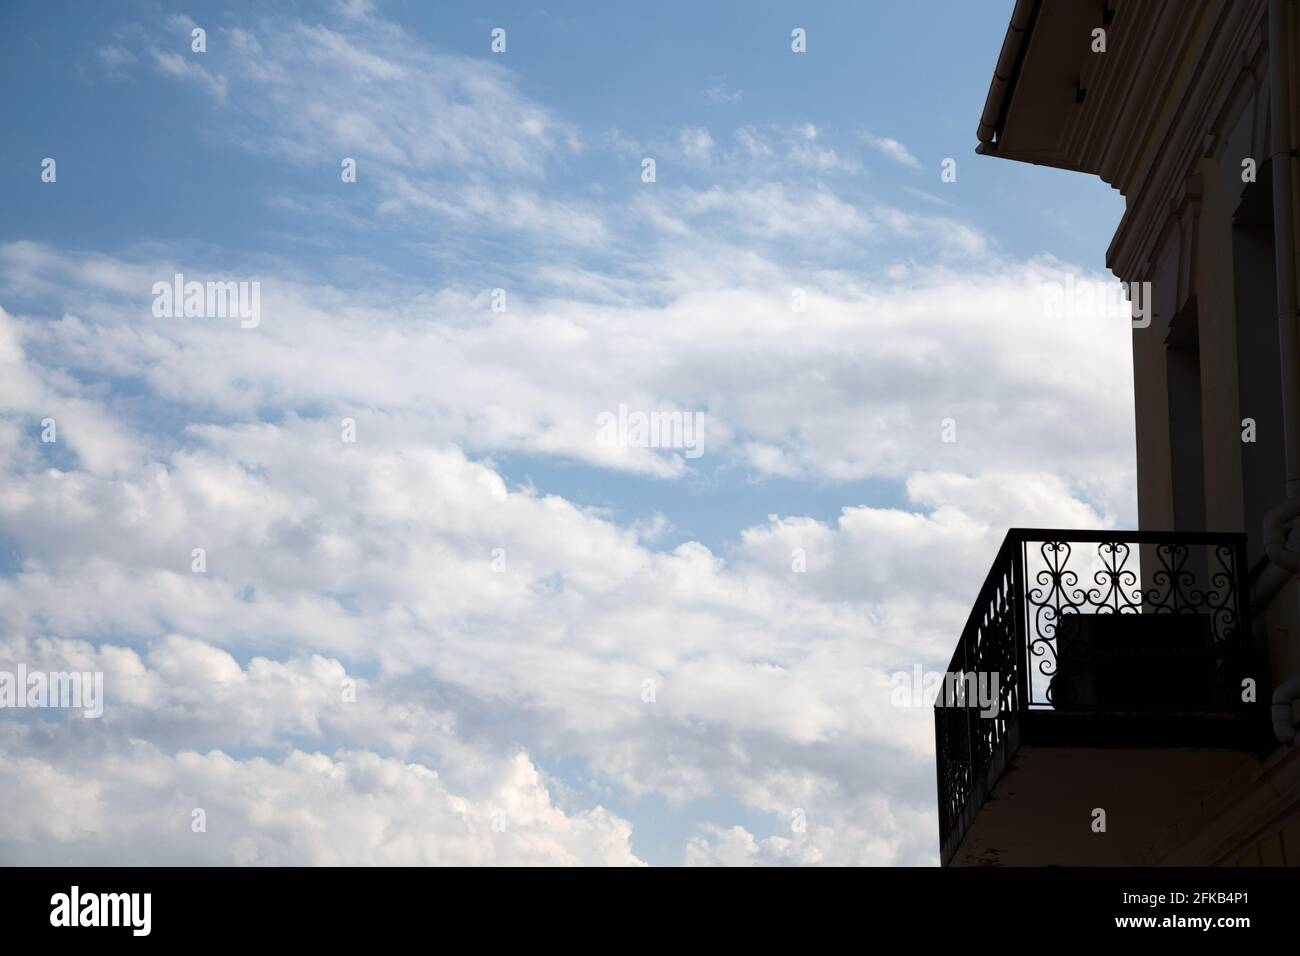 Image of old building against the sky with clouds Stock Photo